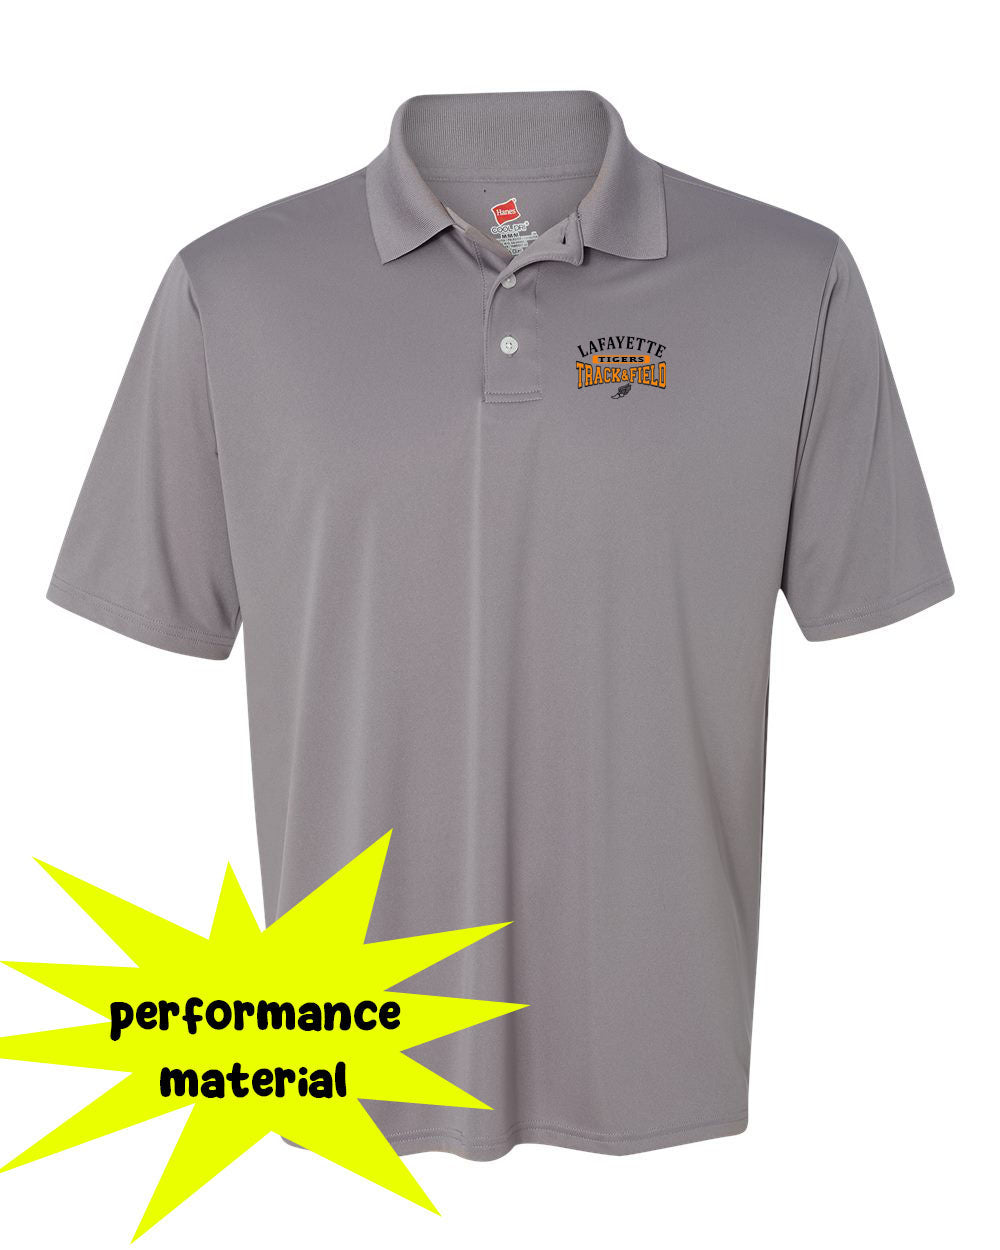 Lafayette Track Performance Material Polo T-Shirt Design 2